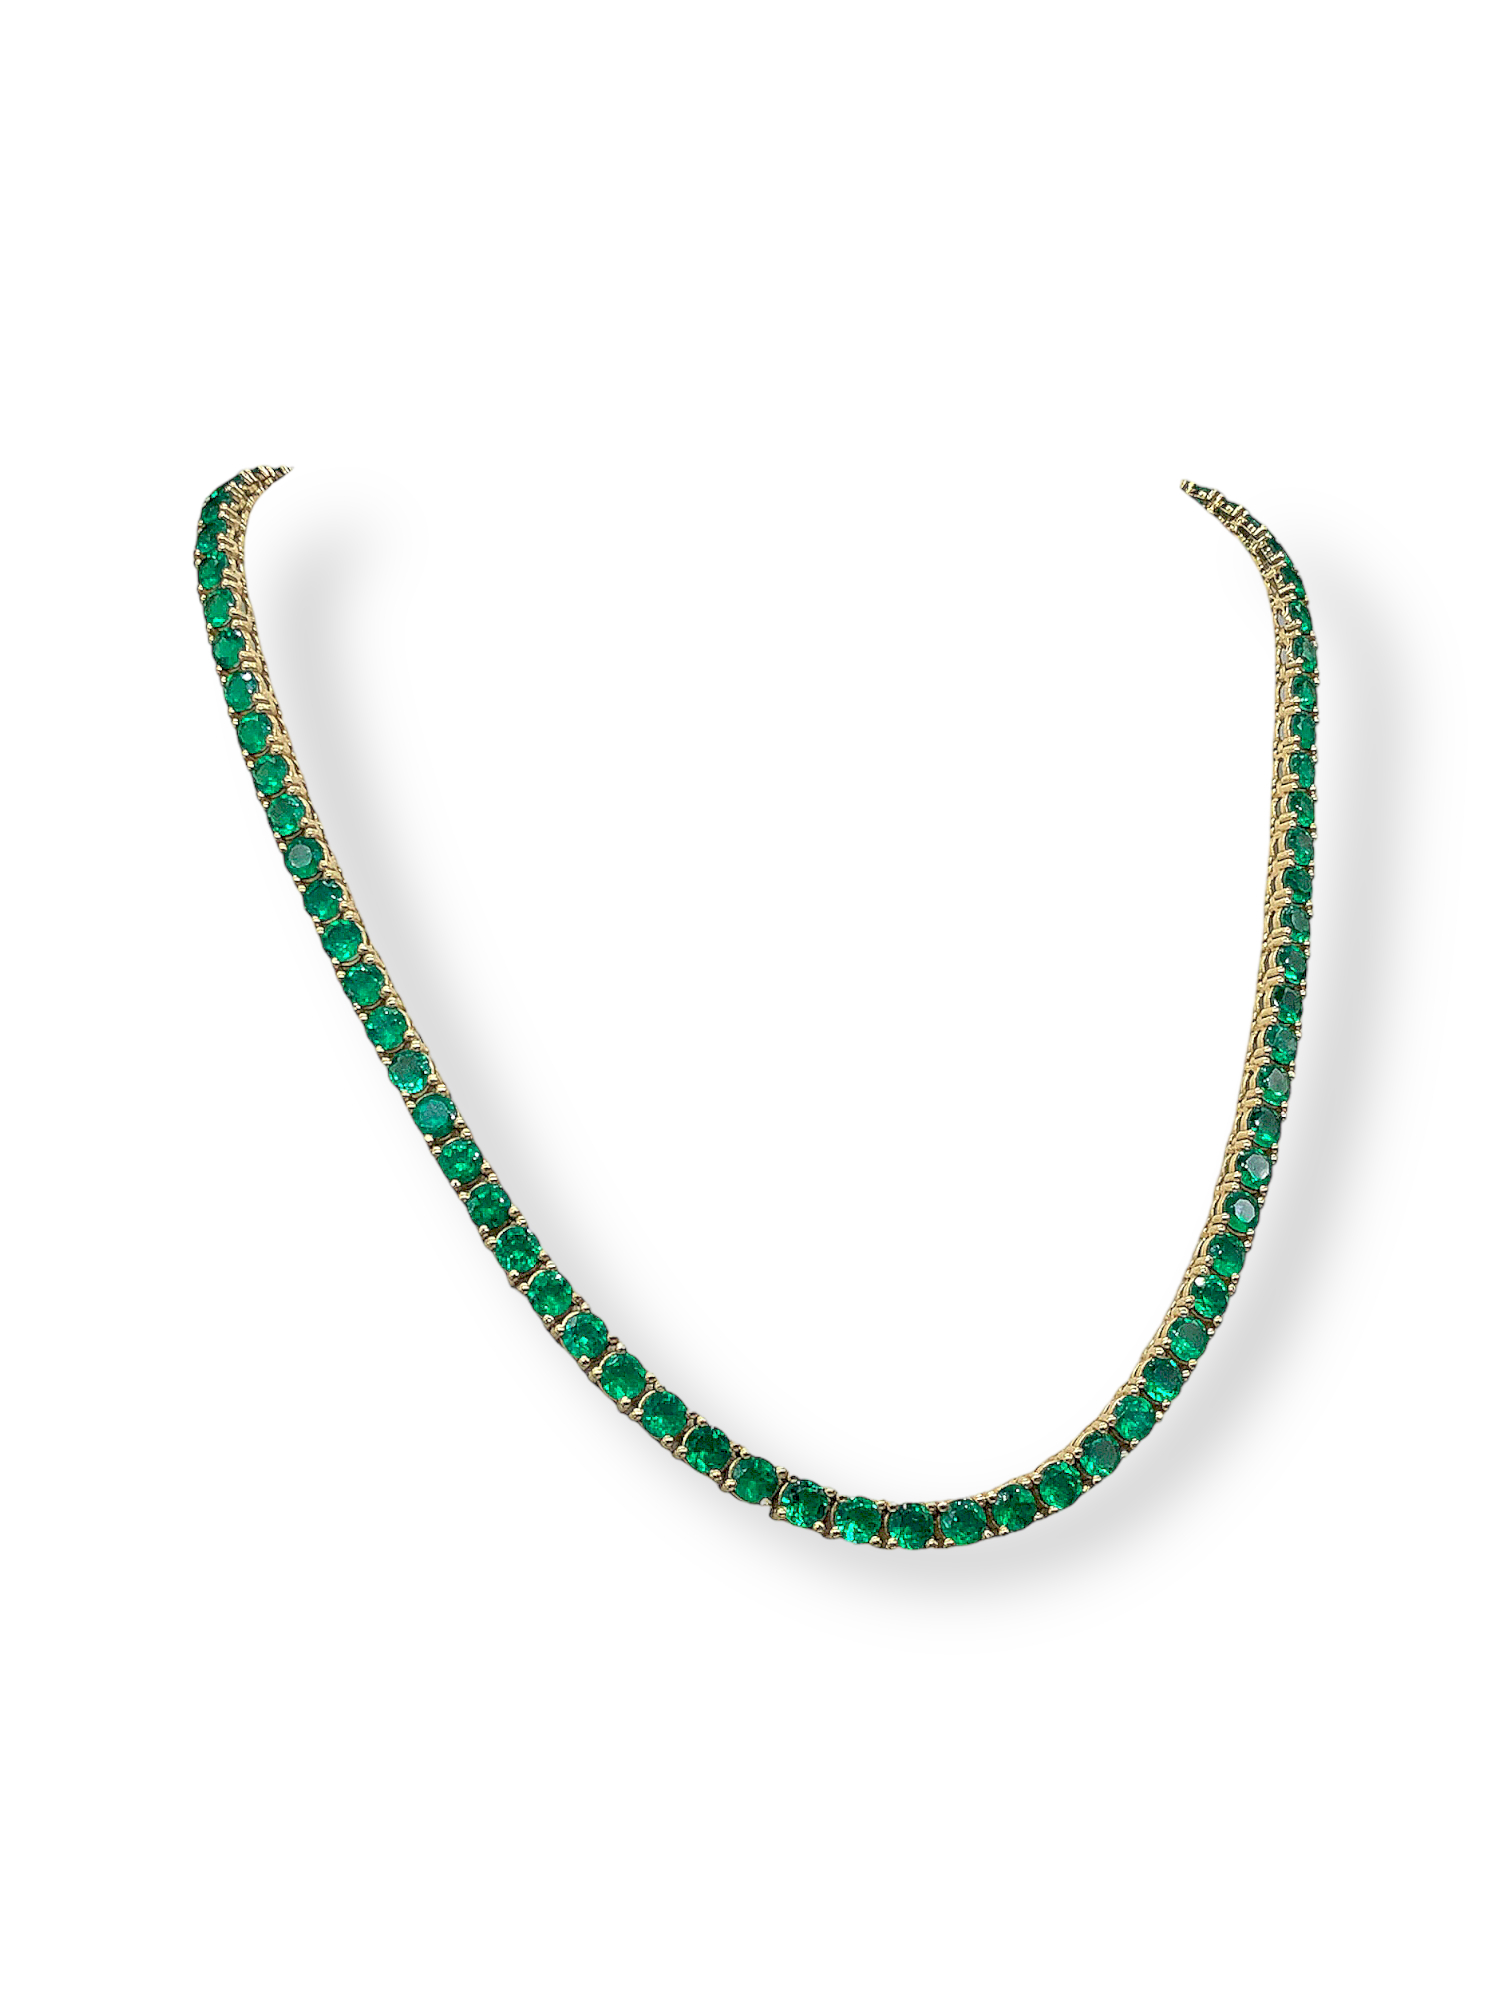 Emerald and Diamond Alternating Size Eternity Necklace in 14k White Gold  (2.5mm)